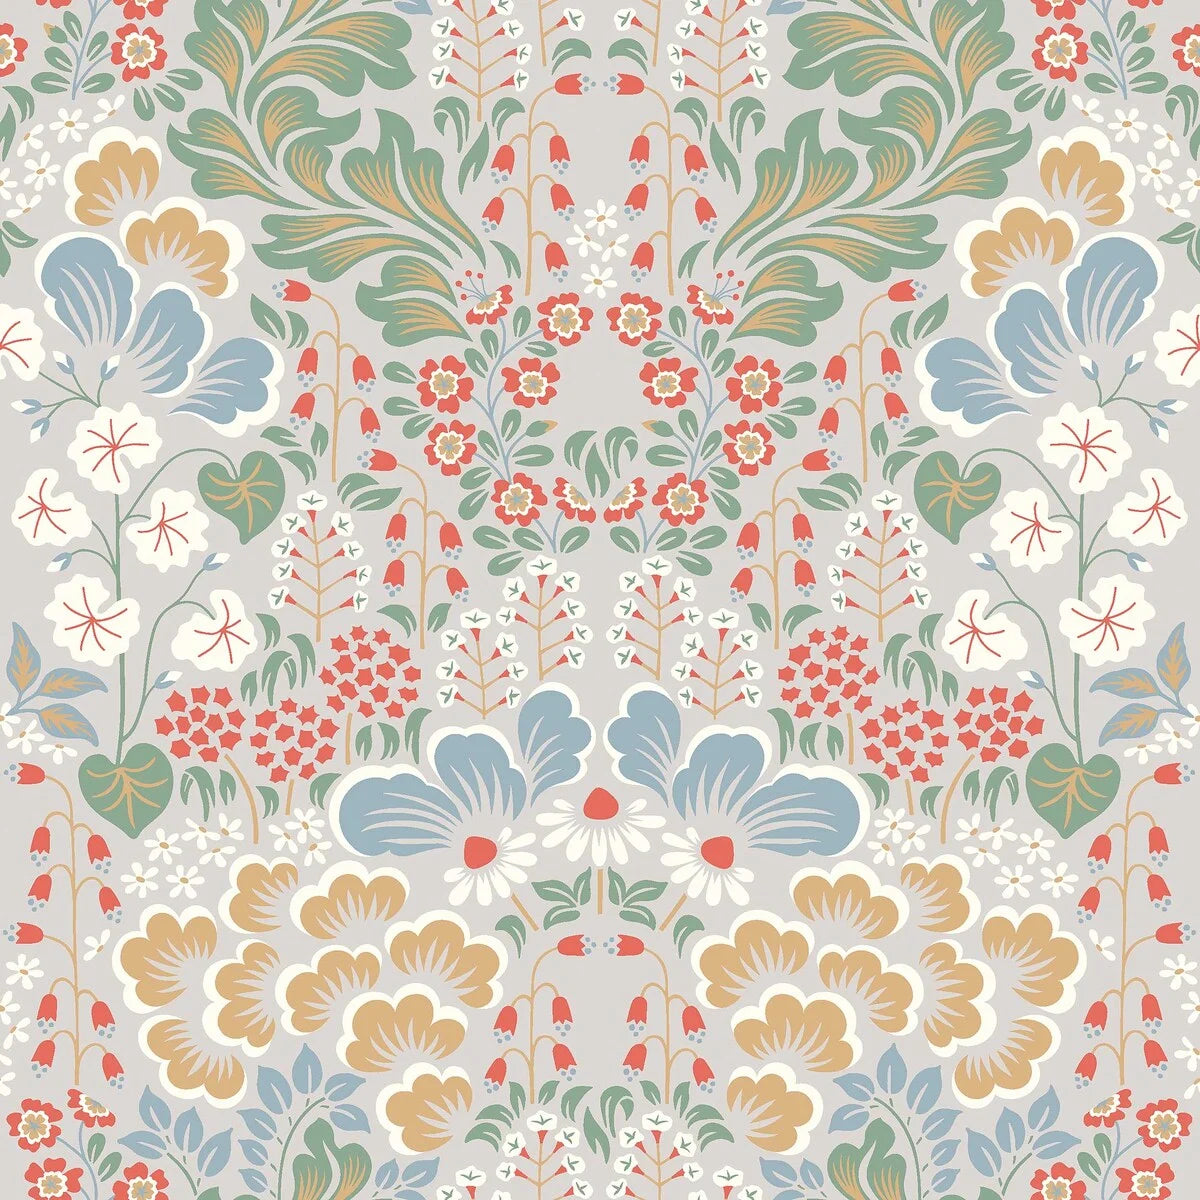 Colored in light and optimistic tones of green, yellow, blue, red, and white on a soft and warm grey background, our Blomstervall wallpaper is instantly calming.